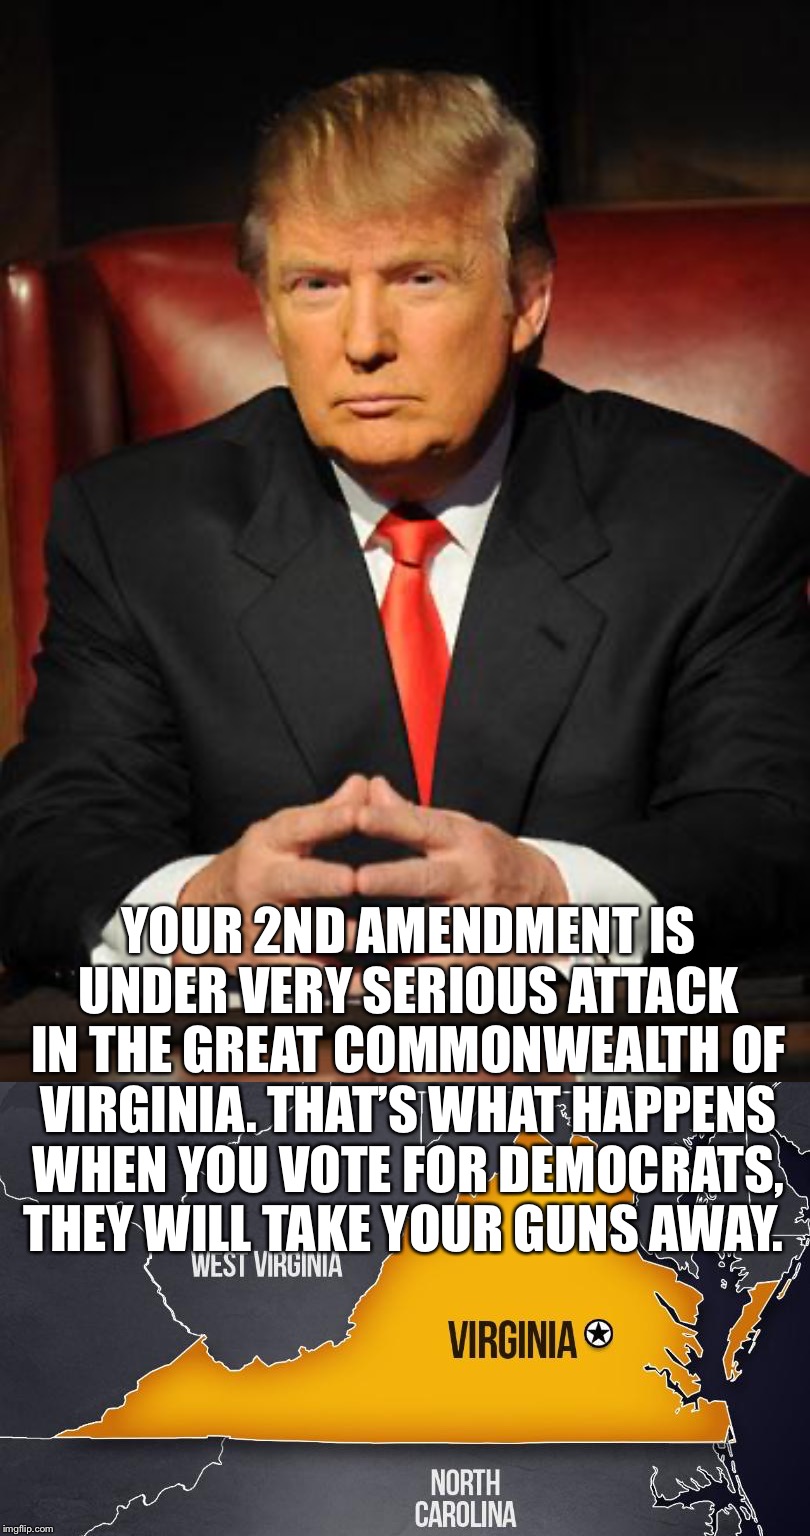 Trump speaks directly to Americans: Your 2nd Amendment is under very serious attack in the Great Commonwealth of Virginia... | YOUR 2ND AMENDMENT IS UNDER VERY SERIOUS ATTACK IN THE GREAT COMMONWEALTH OF VIRGINIA. THAT’S WHAT HAPPENS WHEN YOU VOTE FOR DEMOCRATS, THEY WILL TAKE YOUR GUNS AWAY. | image tagged in trump,2nd amendment,virginia,gun,Conservative | made w/ Imgflip meme maker